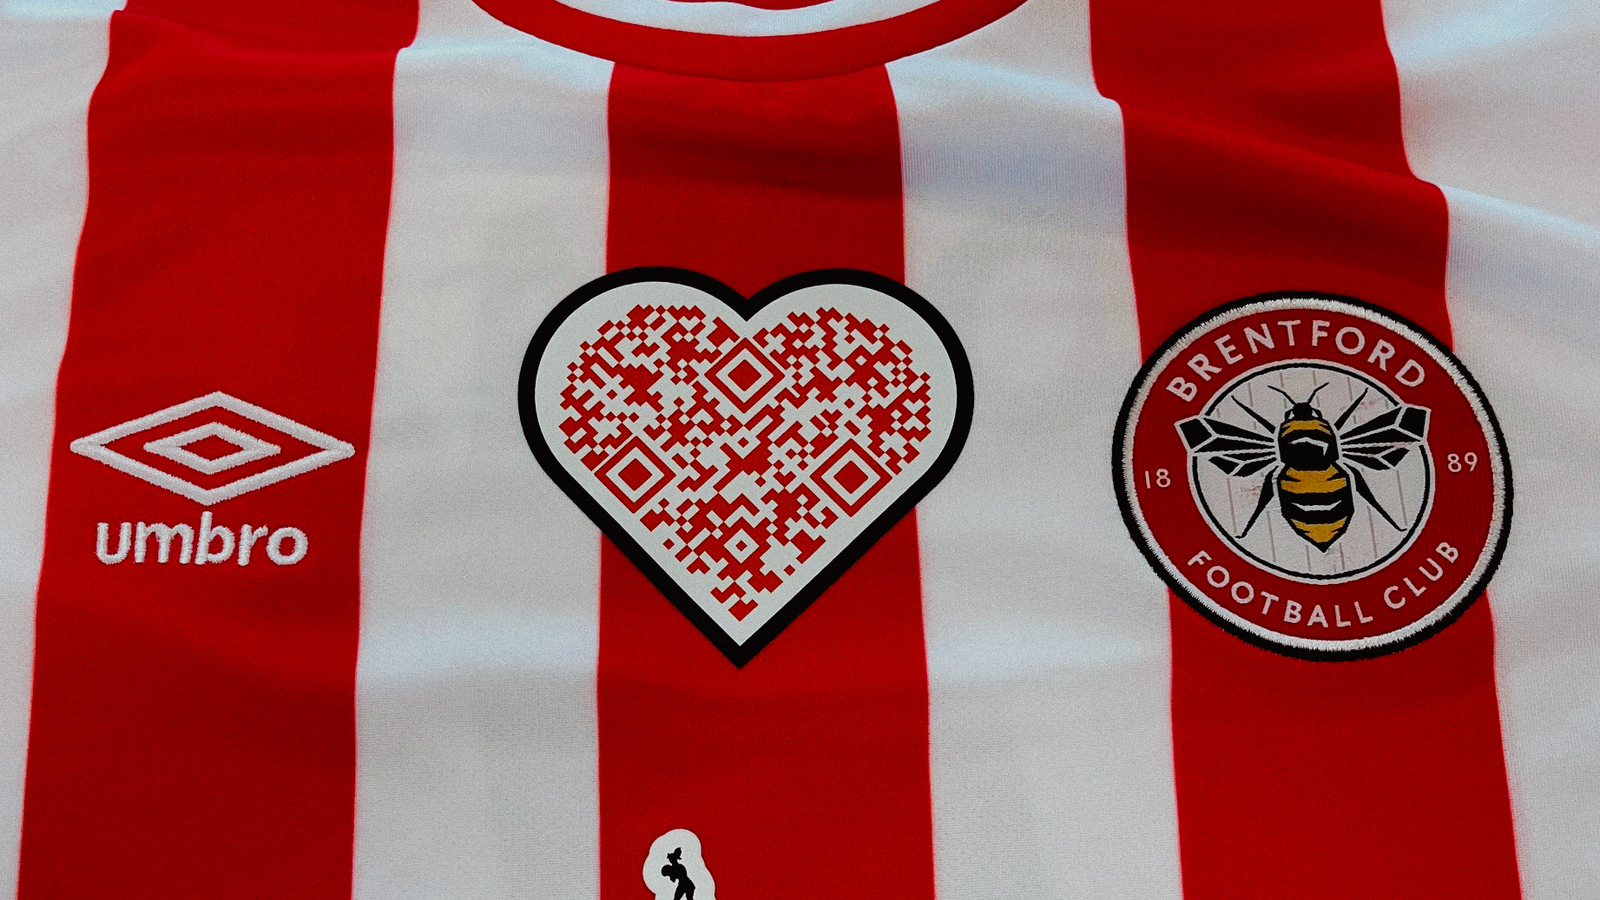 brentford-to-wear-heart-shaped-qr-code-on-shirts-against-chelsea-to-raise-cpr-awareness-after-announcing-plans-to-honour-robert-rowan